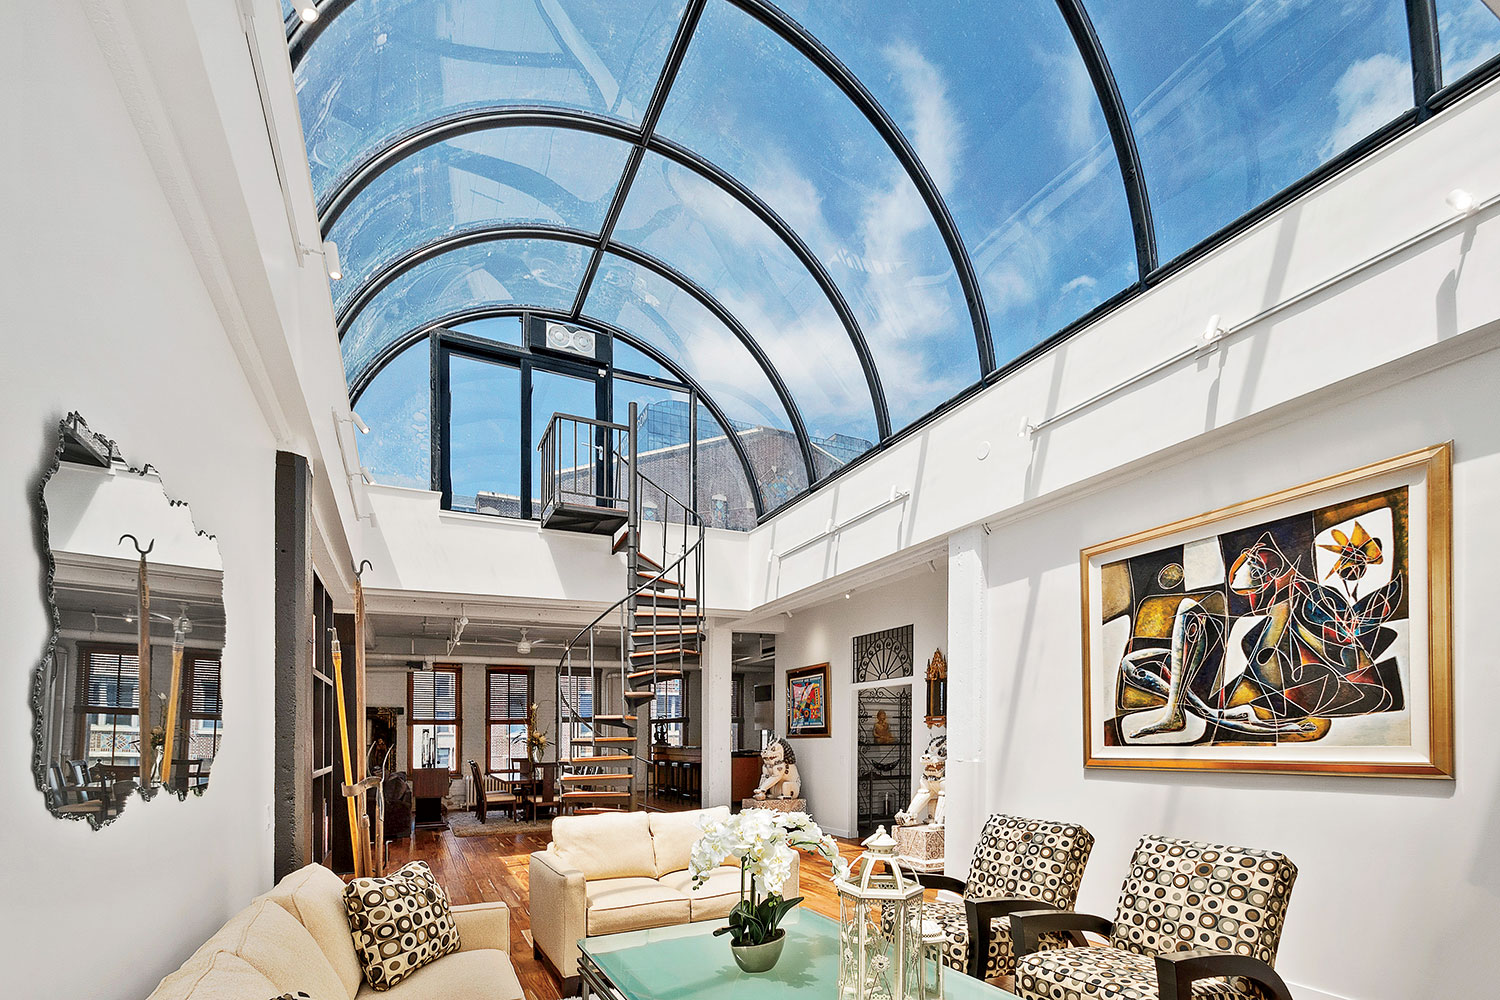 Inside the penthouse at 727 South Dearborn Street